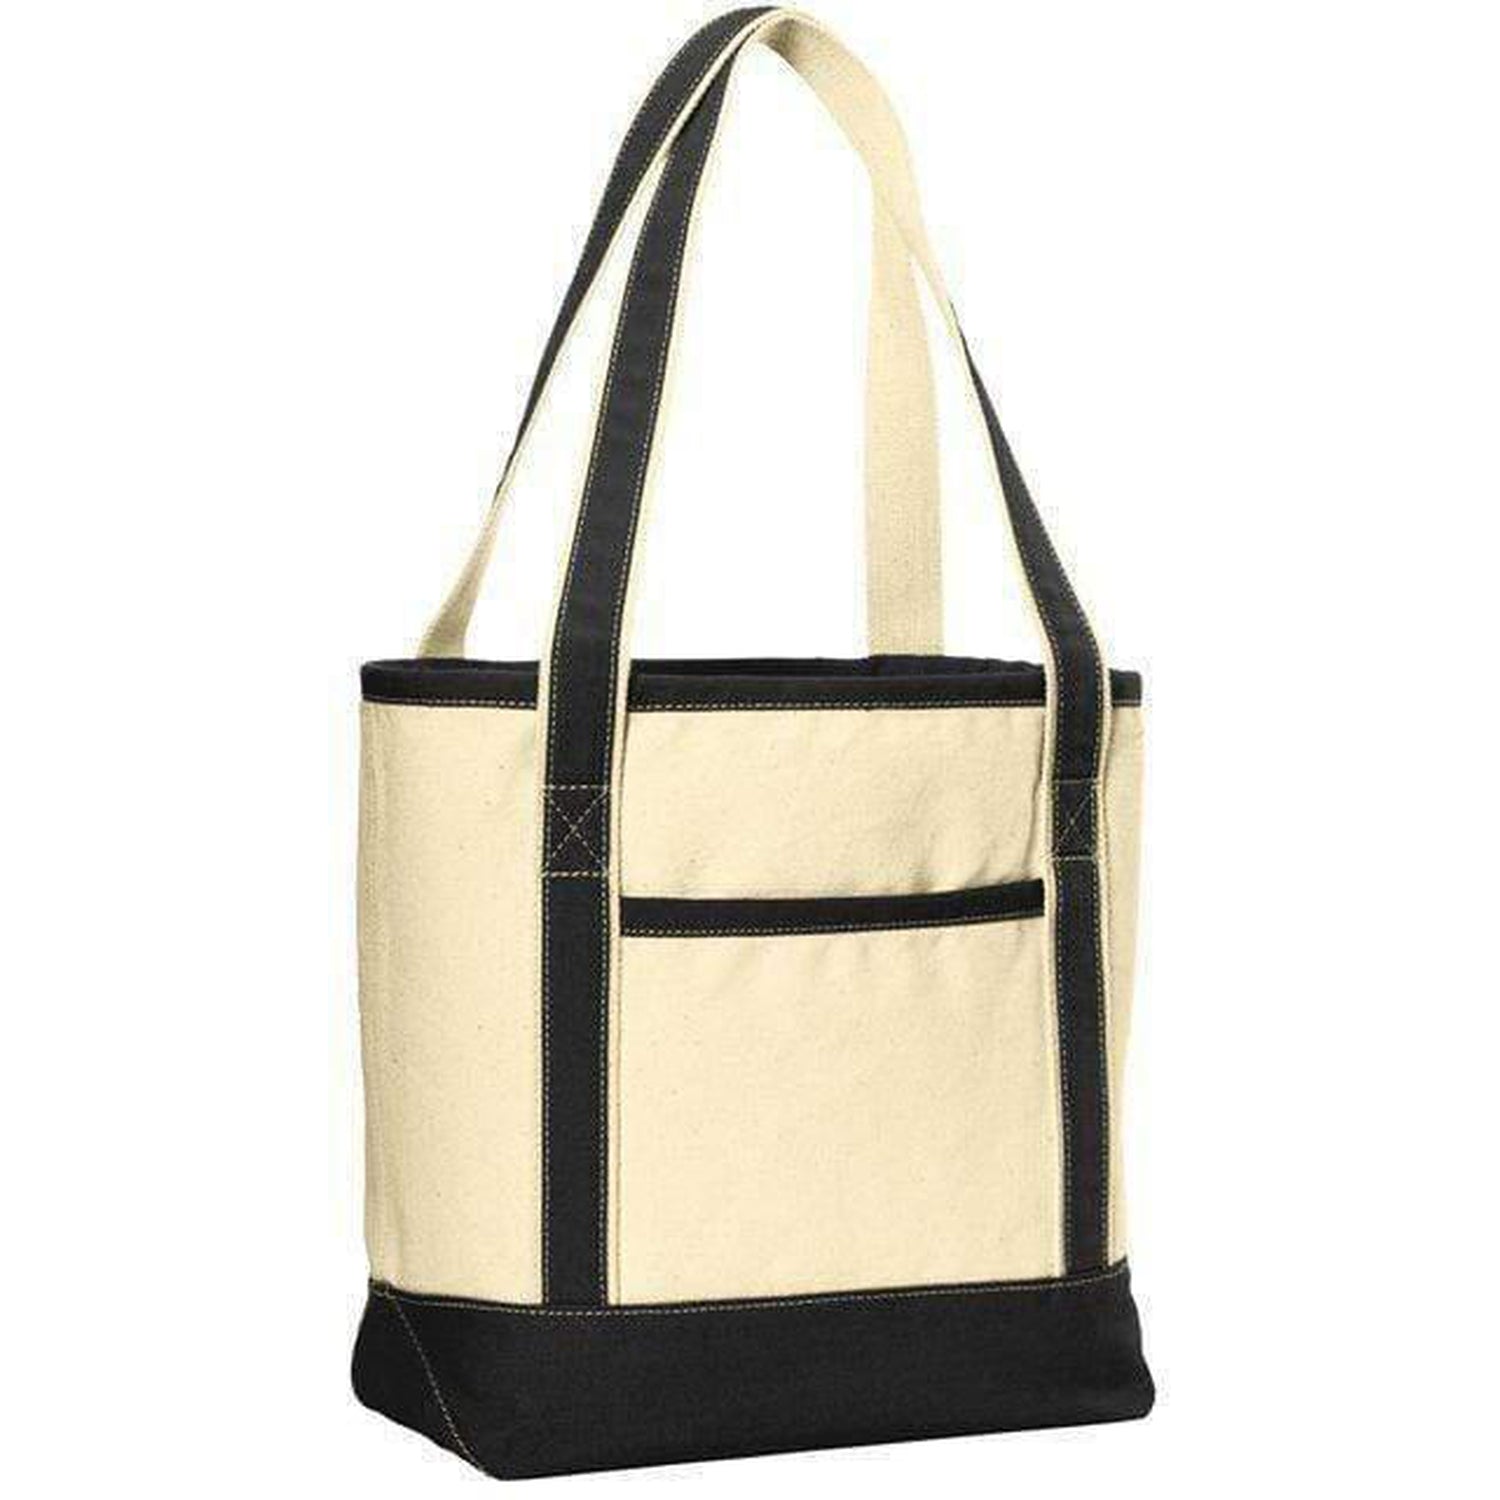 Heavy Duty Canvas Boat Tote Bag with Front Pocket – BagzDepot™